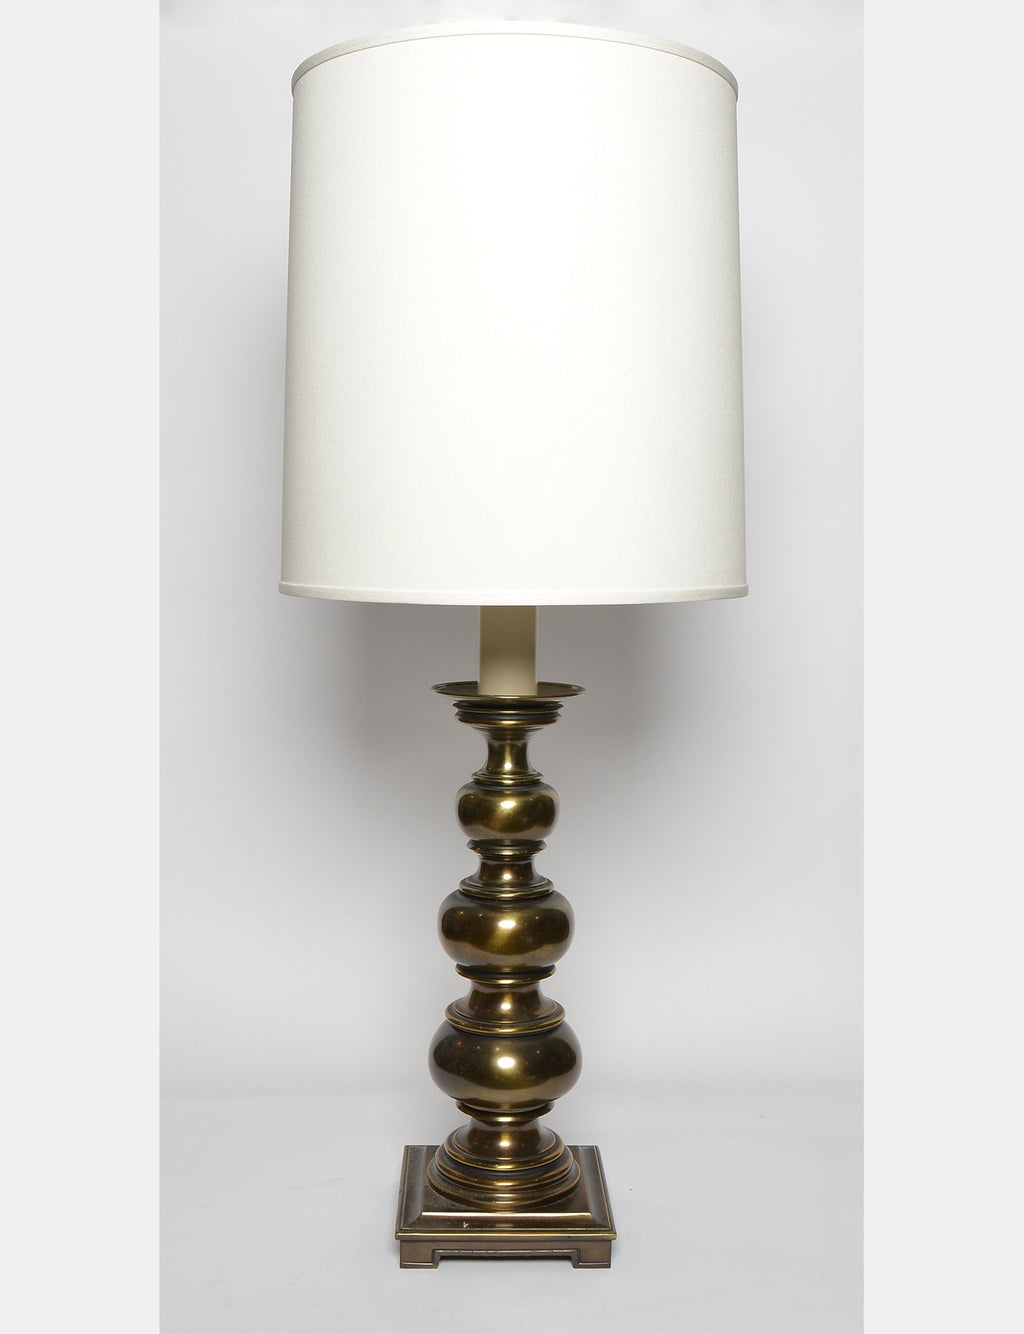 Pair of Candle Sleeve Brass Plated Table Lamps